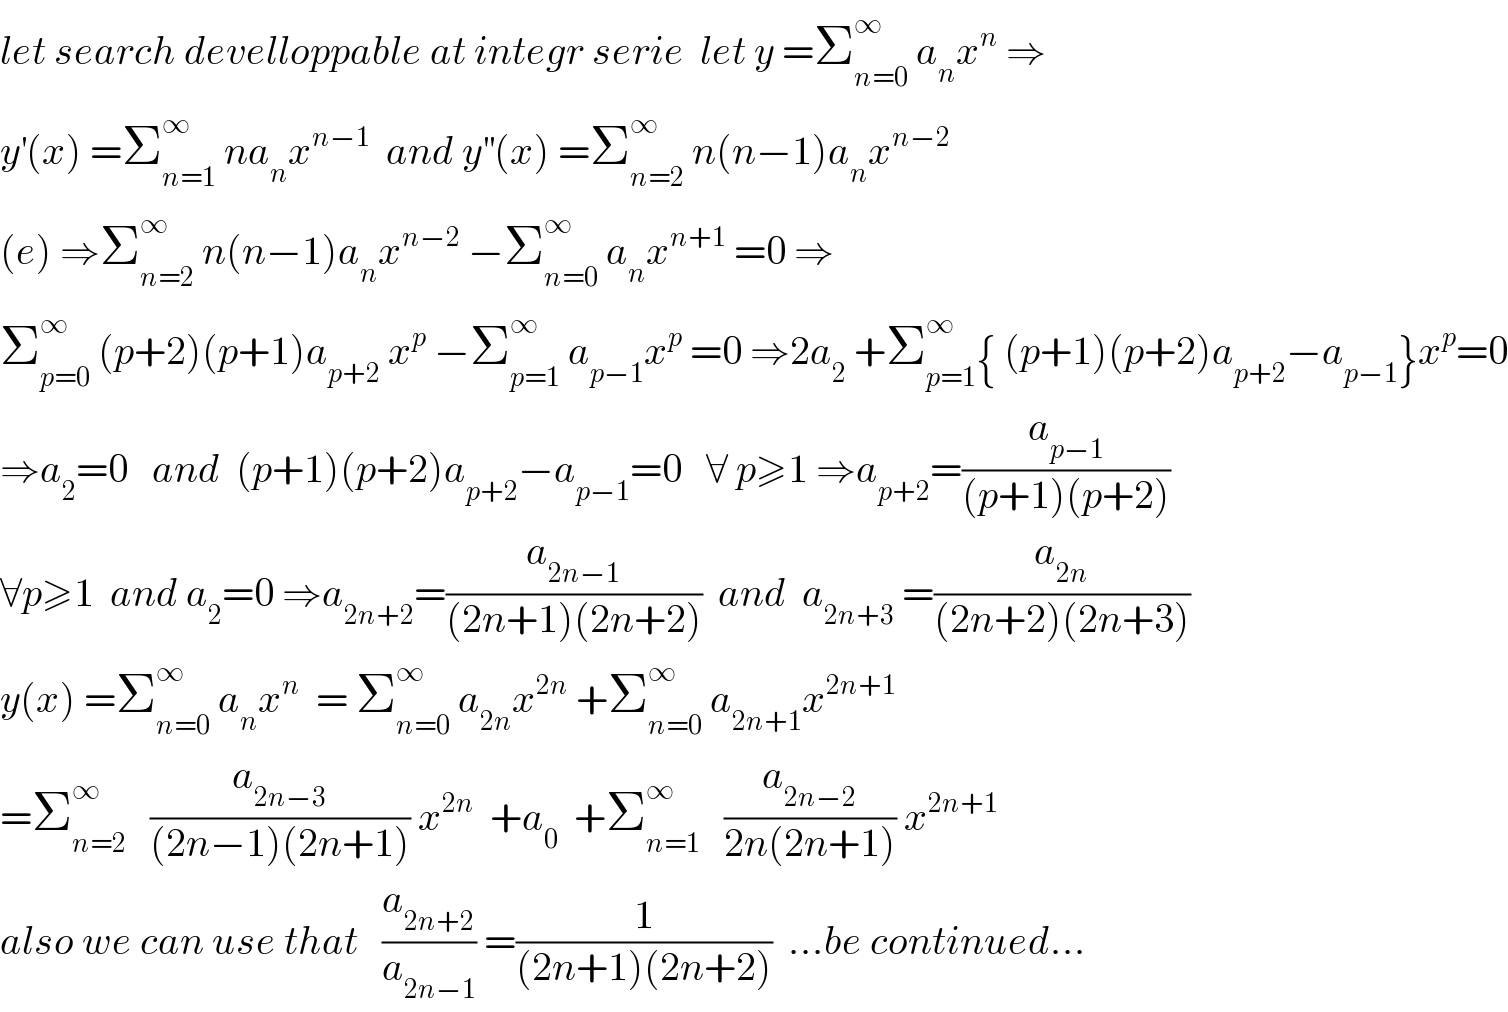 let search develloppable at integr serie  let y =Σ_(n=0) ^∞  a_n x^n  ⇒  y^′ (x) =Σ_(n=1) ^∞  na_n x^(n−1)   and y^(′′) (x) =Σ_(n=2) ^∞  n(n−1)a_n x^(n−2)   (e) ⇒Σ_(n=2) ^∞  n(n−1)a_n x^(n−2)  −Σ_(n=0) ^∞  a_n x^(n+1)  =0 ⇒  Σ_(p=0) ^∞  (p+2)(p+1)a_(p+2)  x^p  −Σ_(p=1) ^∞  a_(p−1) x^p  =0 ⇒2a_2  +Σ_(p=1) ^∞ { (p+1)(p+2)a_(p+2) −a_(p−1) }x^p =0  ⇒a_2 =0   and  (p+1)(p+2)a_(p+2) −a_(p−1) =0   ∀ p≥1 ⇒a_(p+2) =(a_(p−1) /((p+1)(p+2)))  ∀p≥1  and a_2 =0 ⇒a_(2n+2) =(a_(2n−1) /((2n+1)(2n+2)))  and  a_(2n+3)  =(a_(2n) /((2n+2)(2n+3)))  y(x) =Σ_(n=0) ^∞  a_n x^n   = Σ_(n=0) ^∞  a_(2n) x^(2n)  +Σ_(n=0) ^∞  a_(2n+1) x^(2n+1)   =Σ_(n=2) ^∞    (a_(2n−3) /((2n−1)(2n+1))) x^(2n)   +a_0   +Σ_(n=1) ^∞    (a_(2n−2) /(2n(2n+1))) x^(2n+1)   also we can use that   (a_(2n+2) /a_(2n−1) ) =(1/((2n+1)(2n+2)))  ...be continued...  